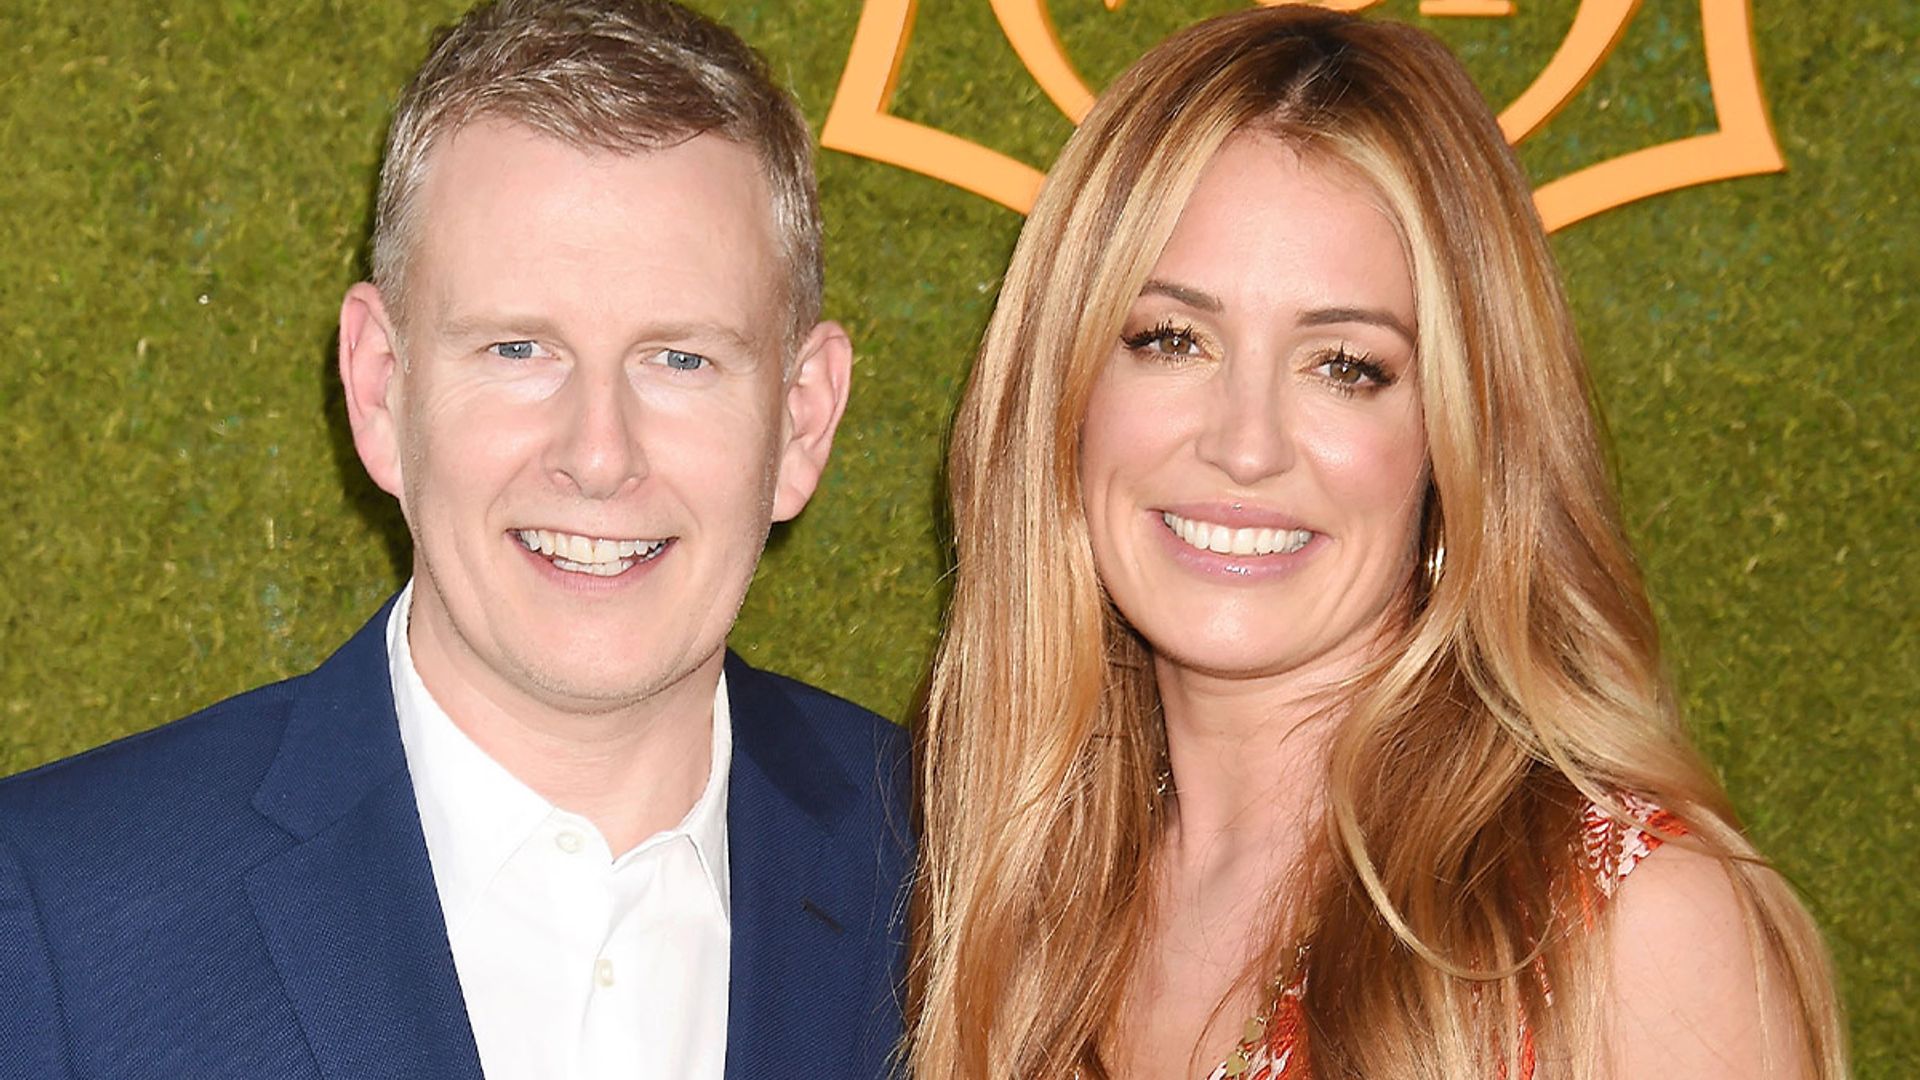 Cat Deeley's sparkling engagement ring from Patrick Kielty is astonishing